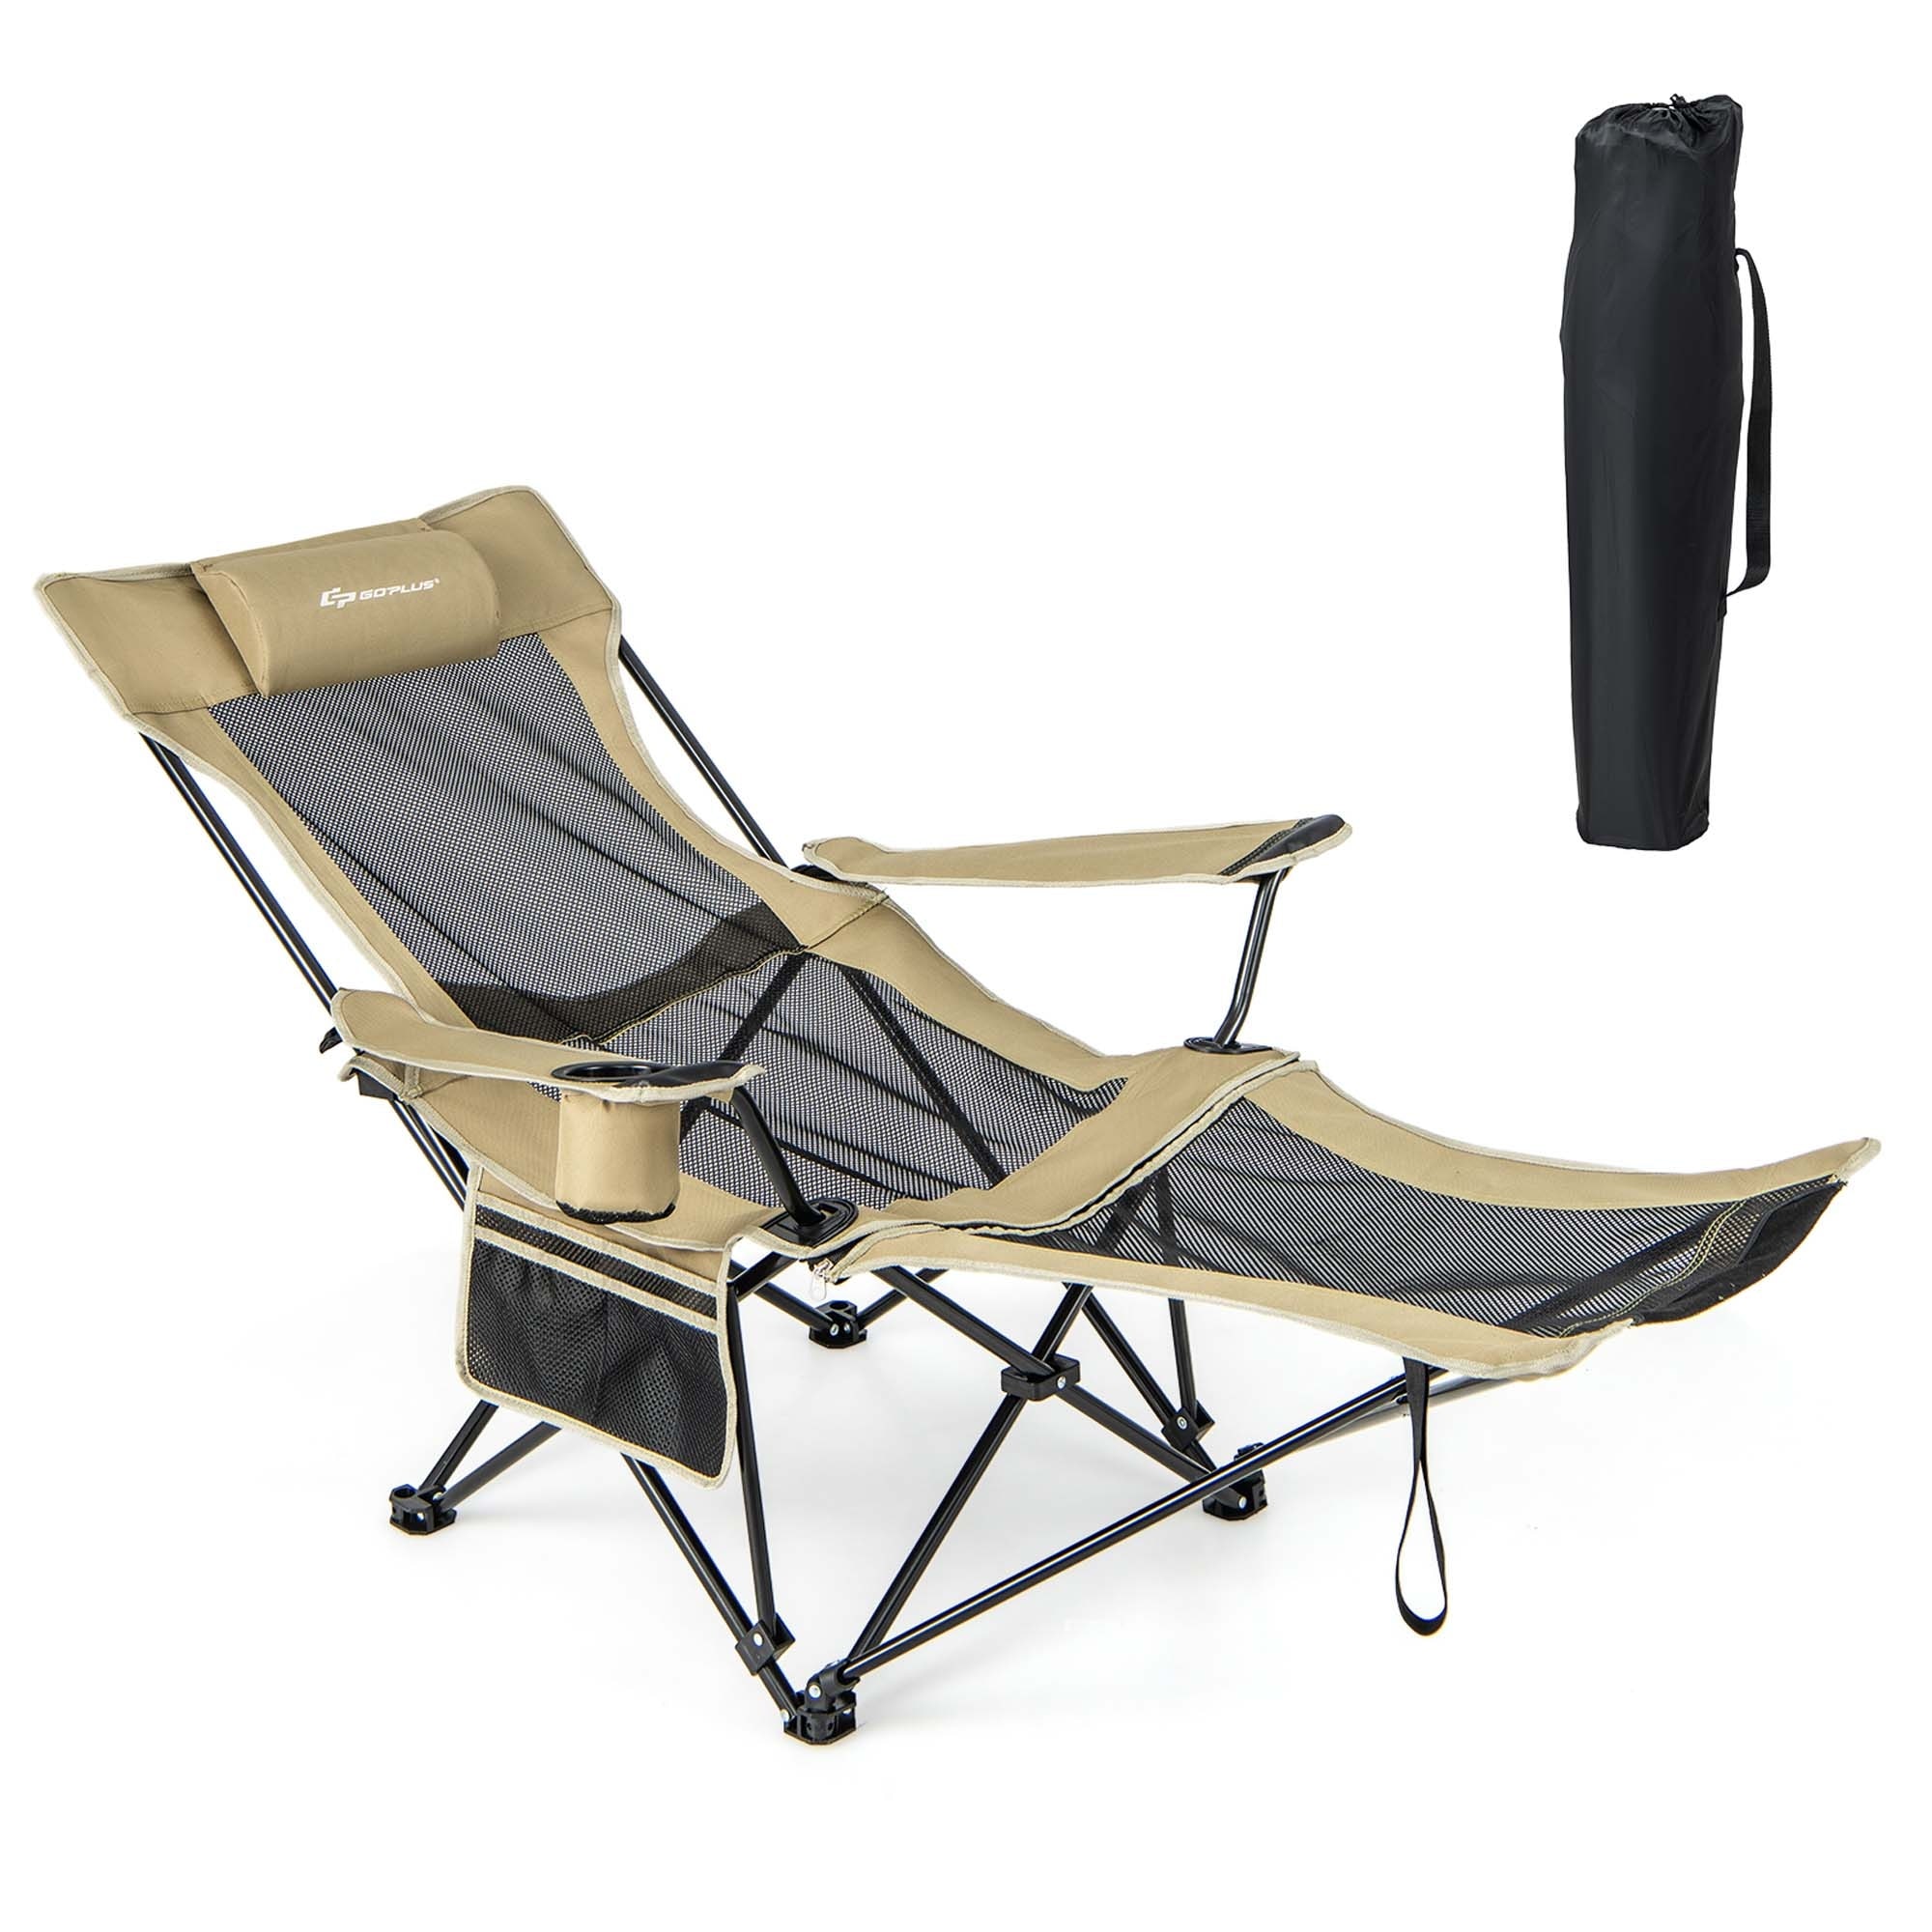 Goplus Folding Camping Chair with Detachable Footrest for Fishing